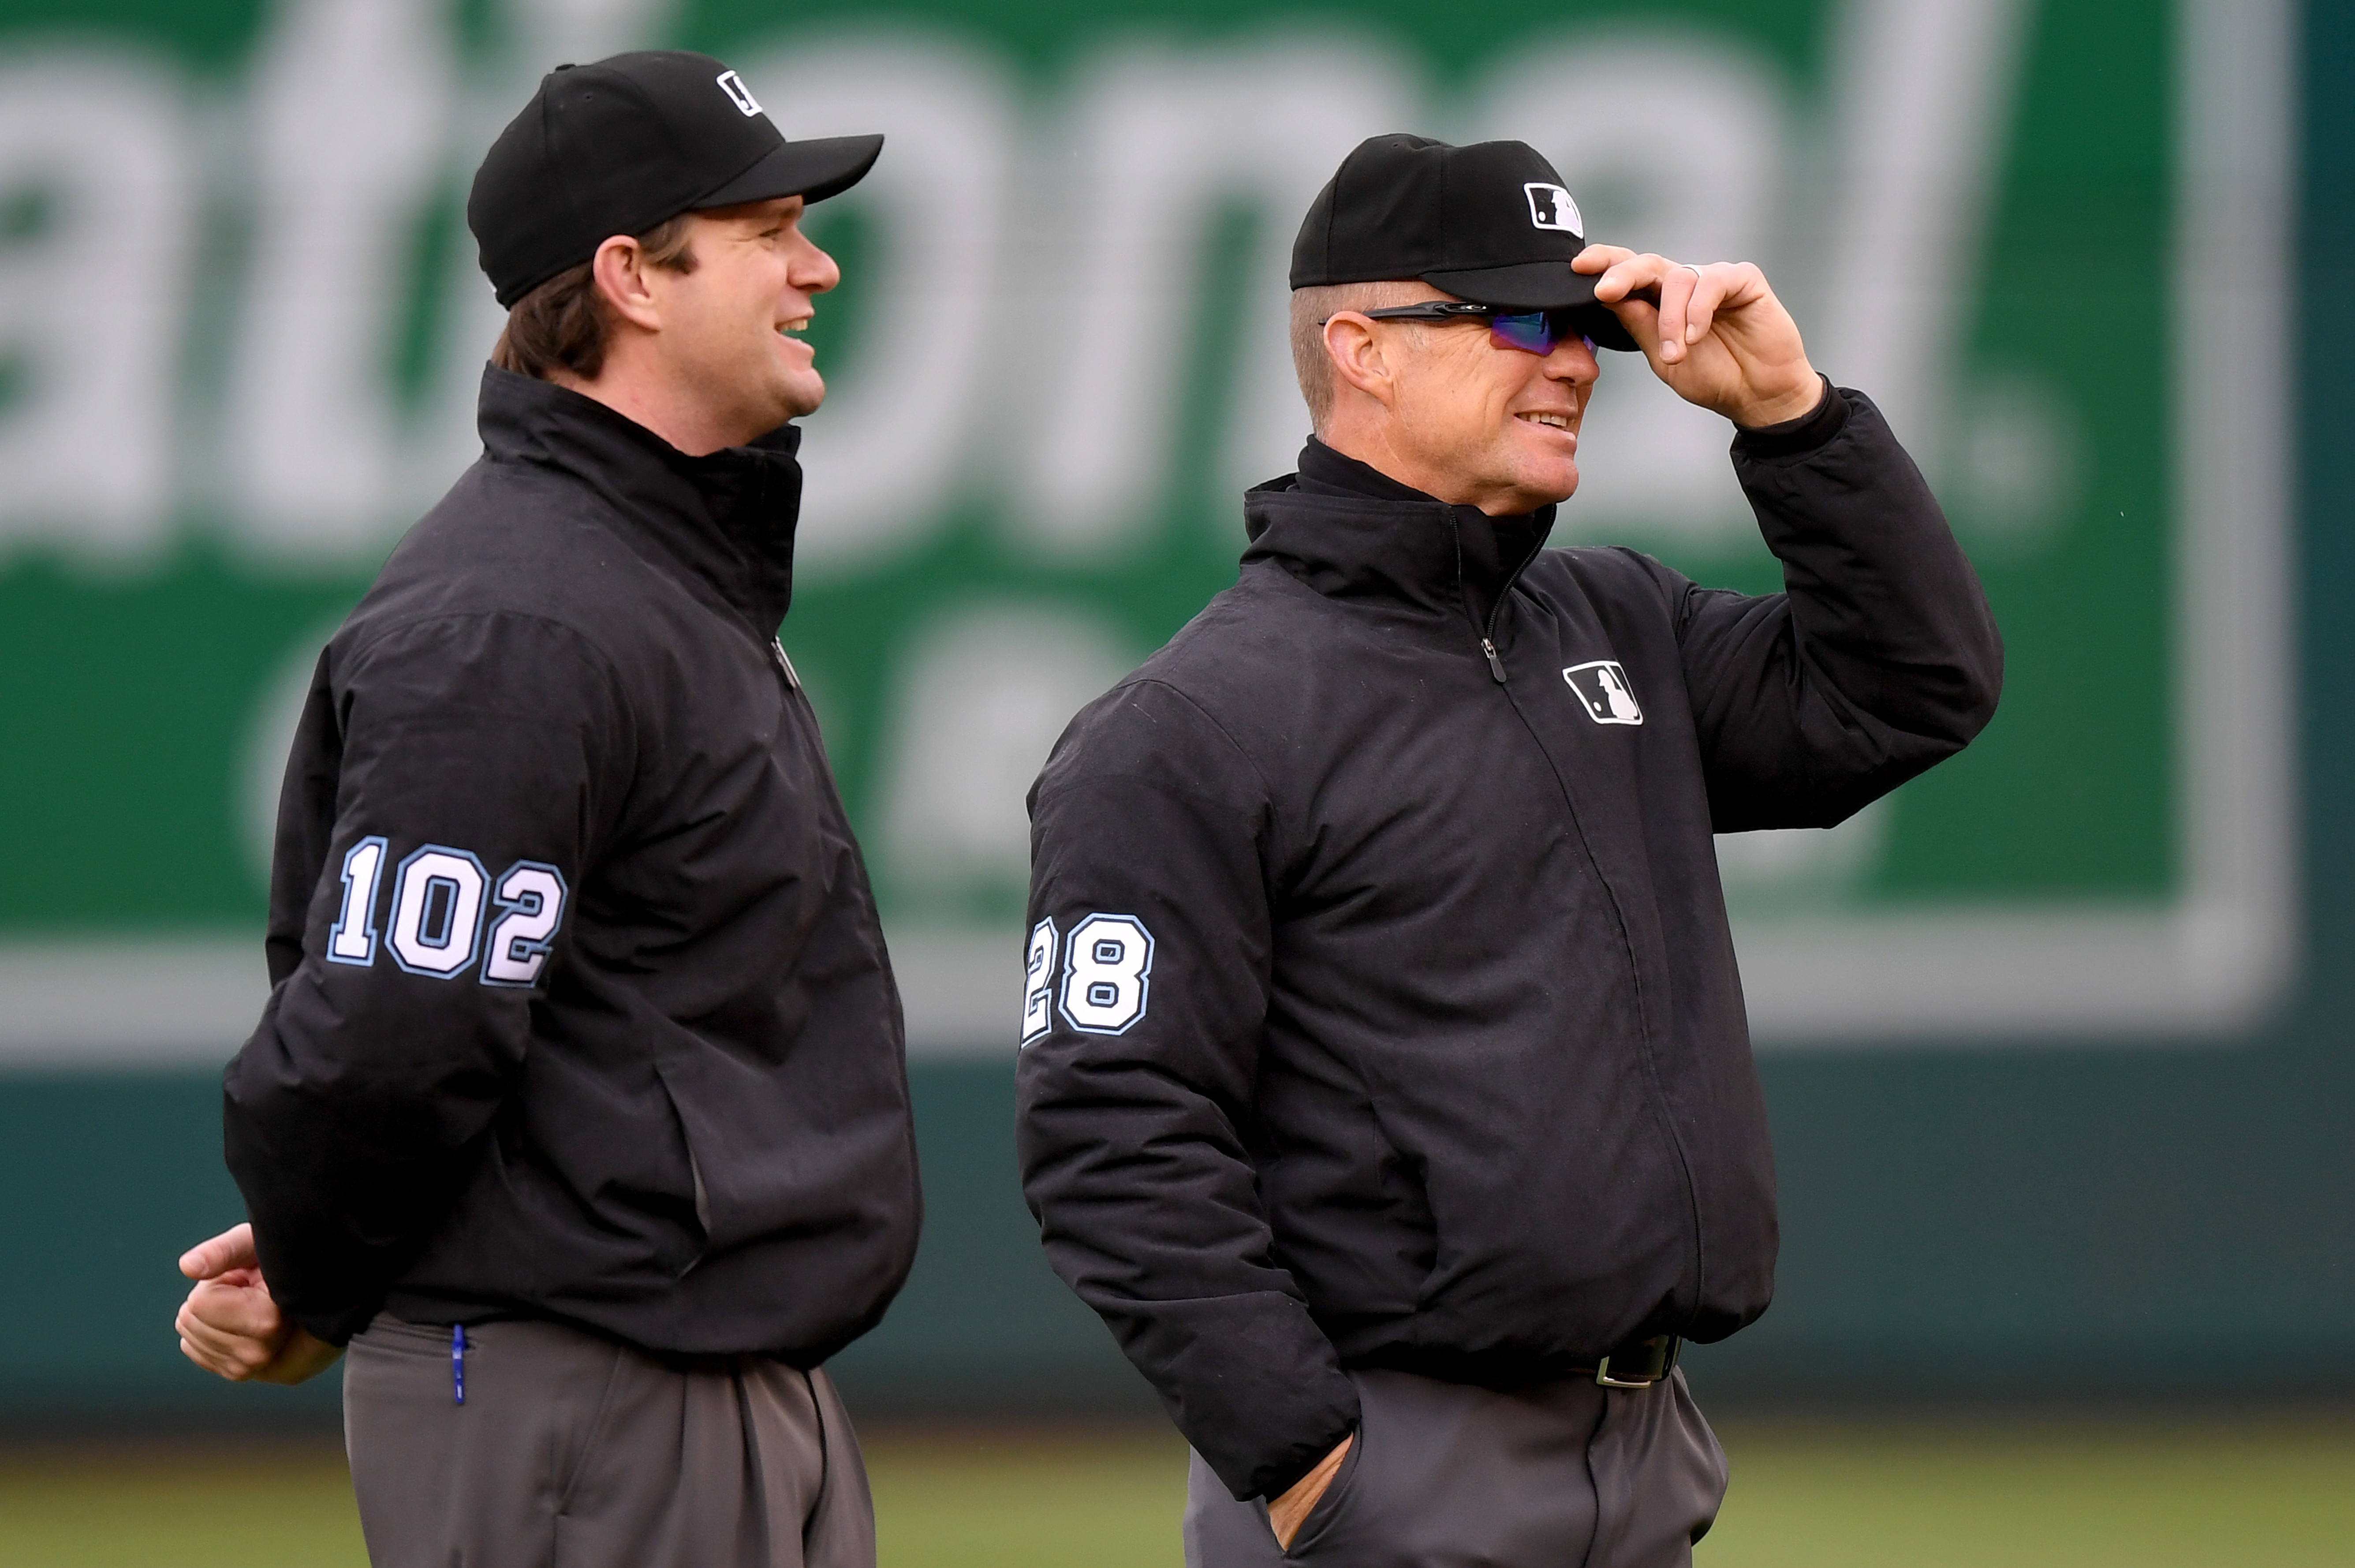 Report: MLB Umpires May Randomly Check Pitchers for Foreign